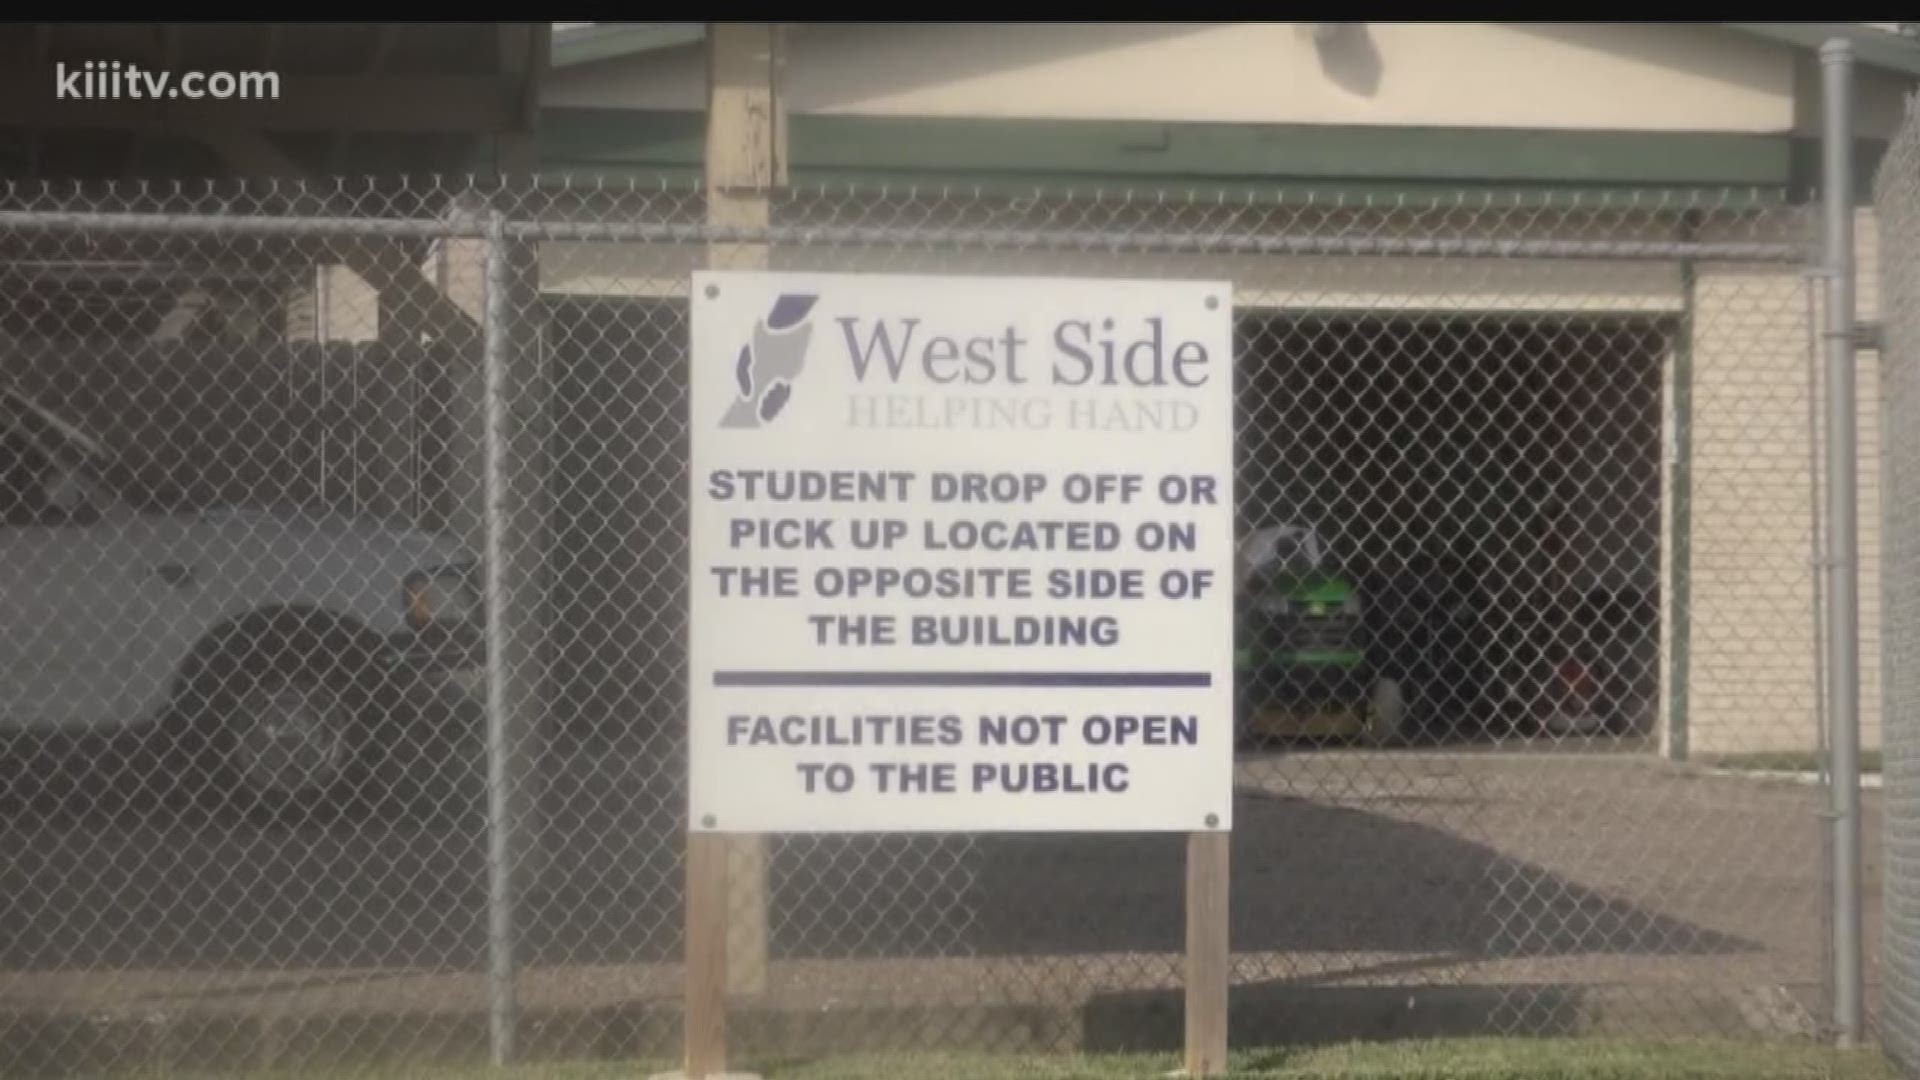 West Side Helping Hand provides free after-school care for more than 100 students in Corpus Christi. The program helps kids stay off the streets and guides them onto a positive path to adulthood.